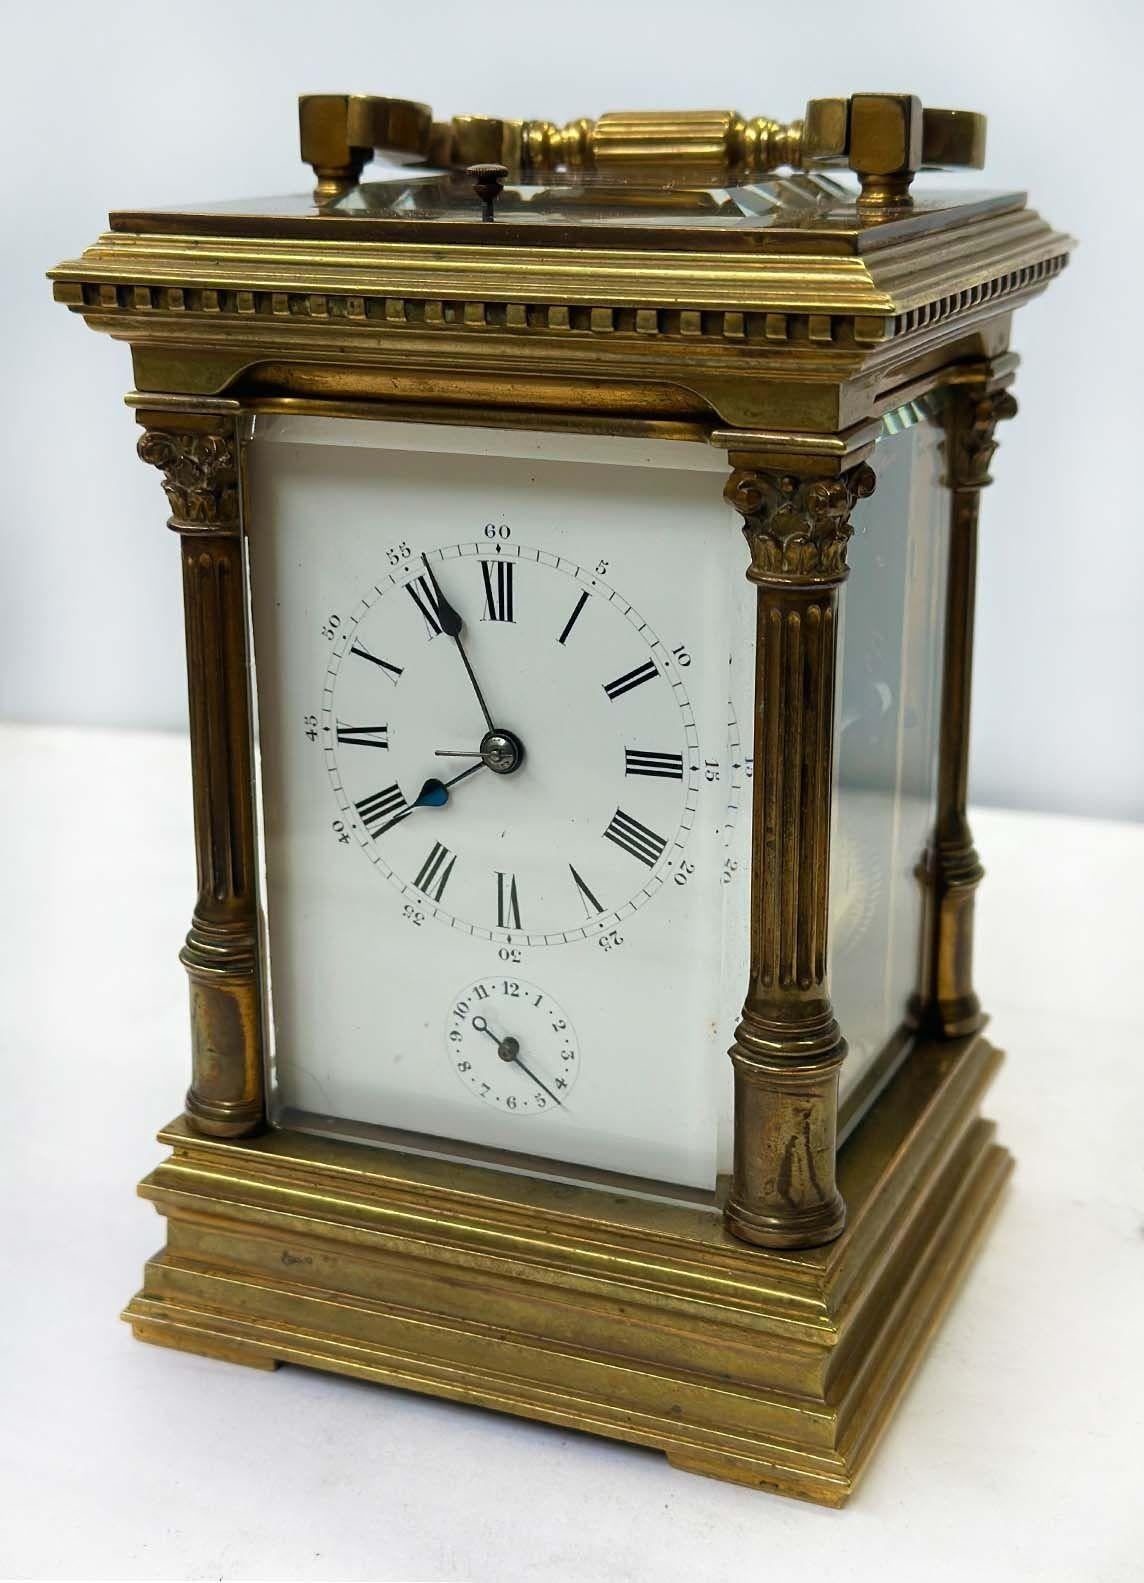 Stunning French brass carriage clock with glass protection by A. Dumas. It is designed with four fluted columns, a dial plate with Roman numerals and more minutes above an alarm setting dial. It is marked on the underside and numbered